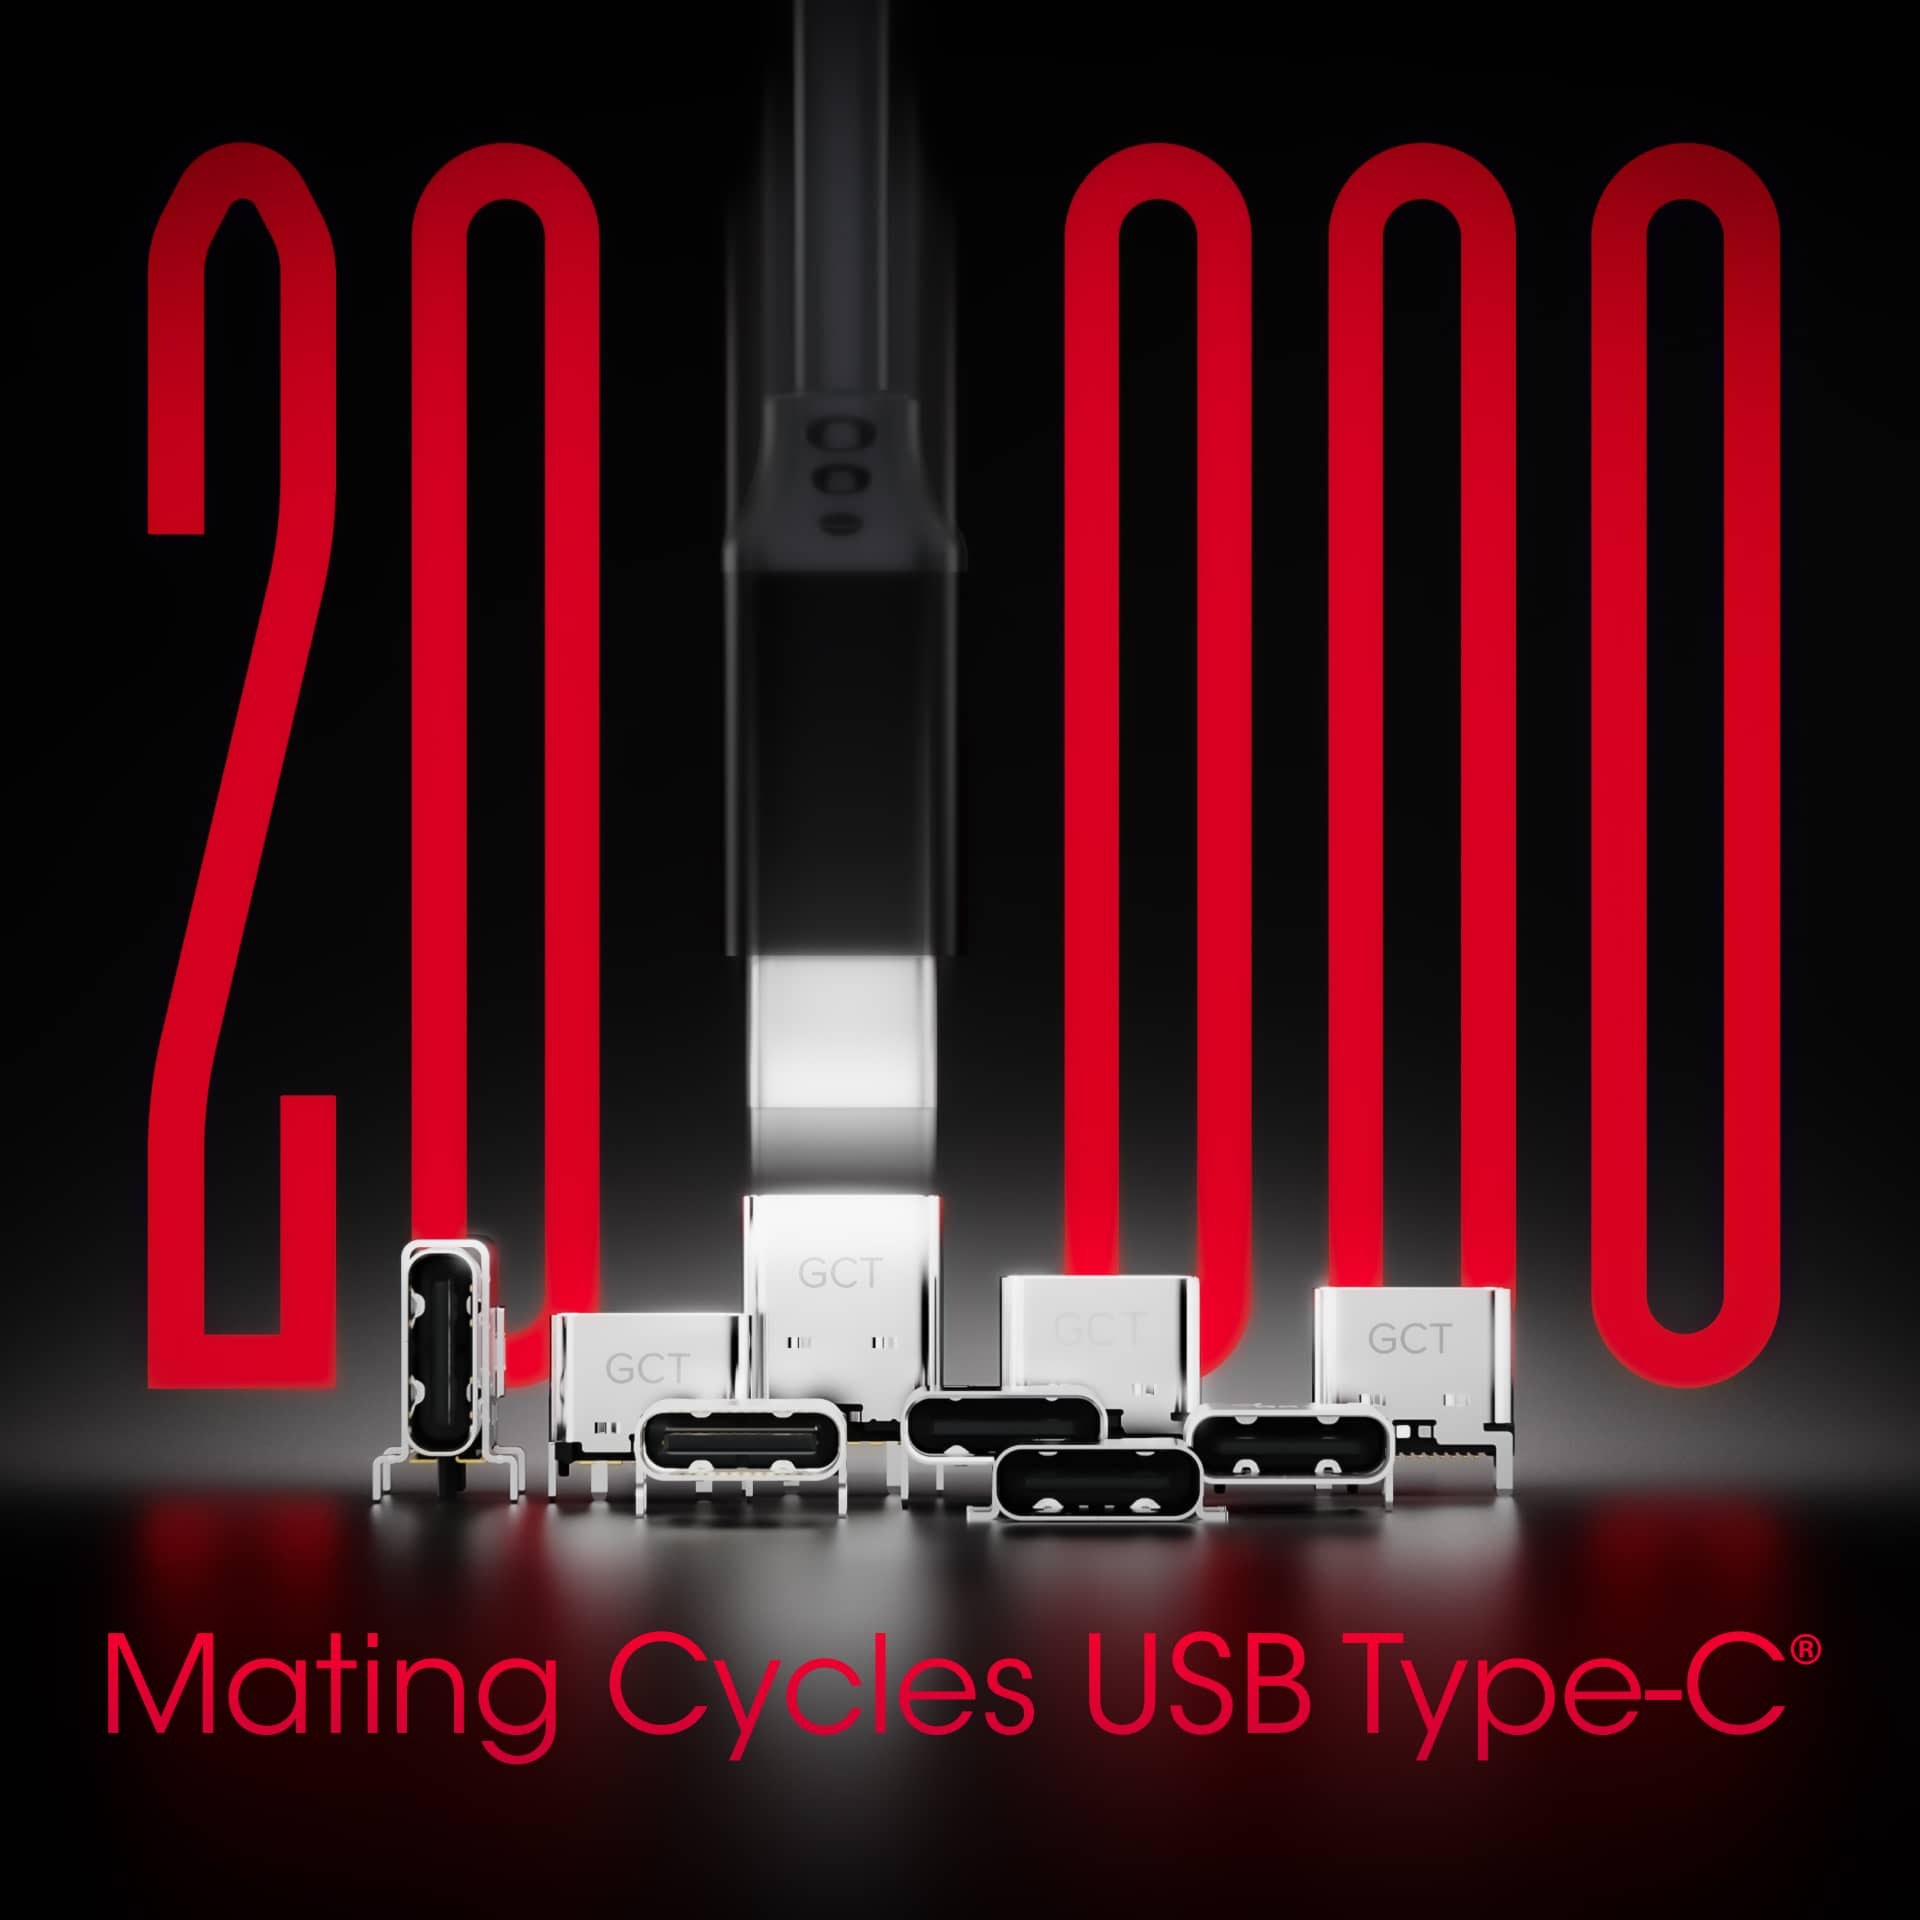 USB Type-C 20K mating cycles